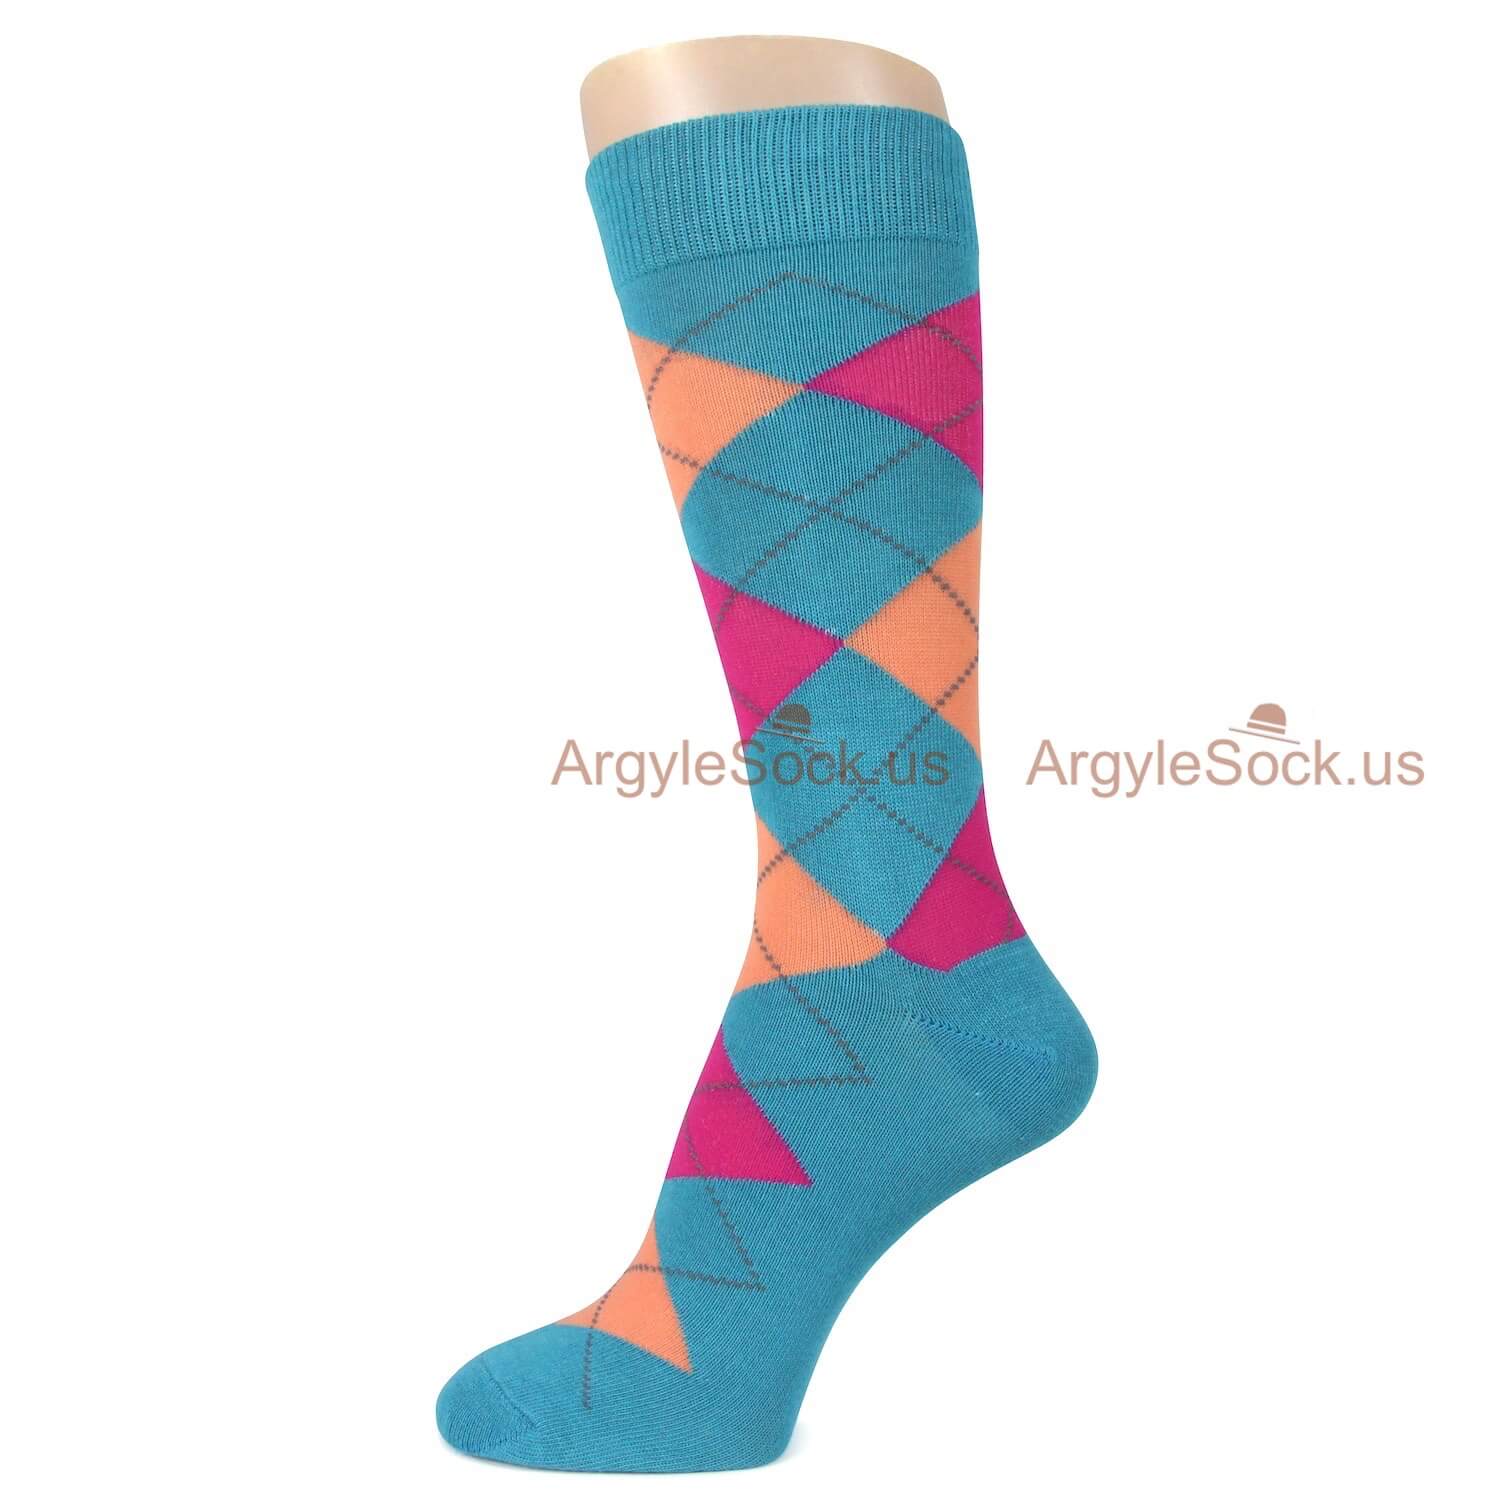 Turquoise Peach and Pink Argyle Socks for Men